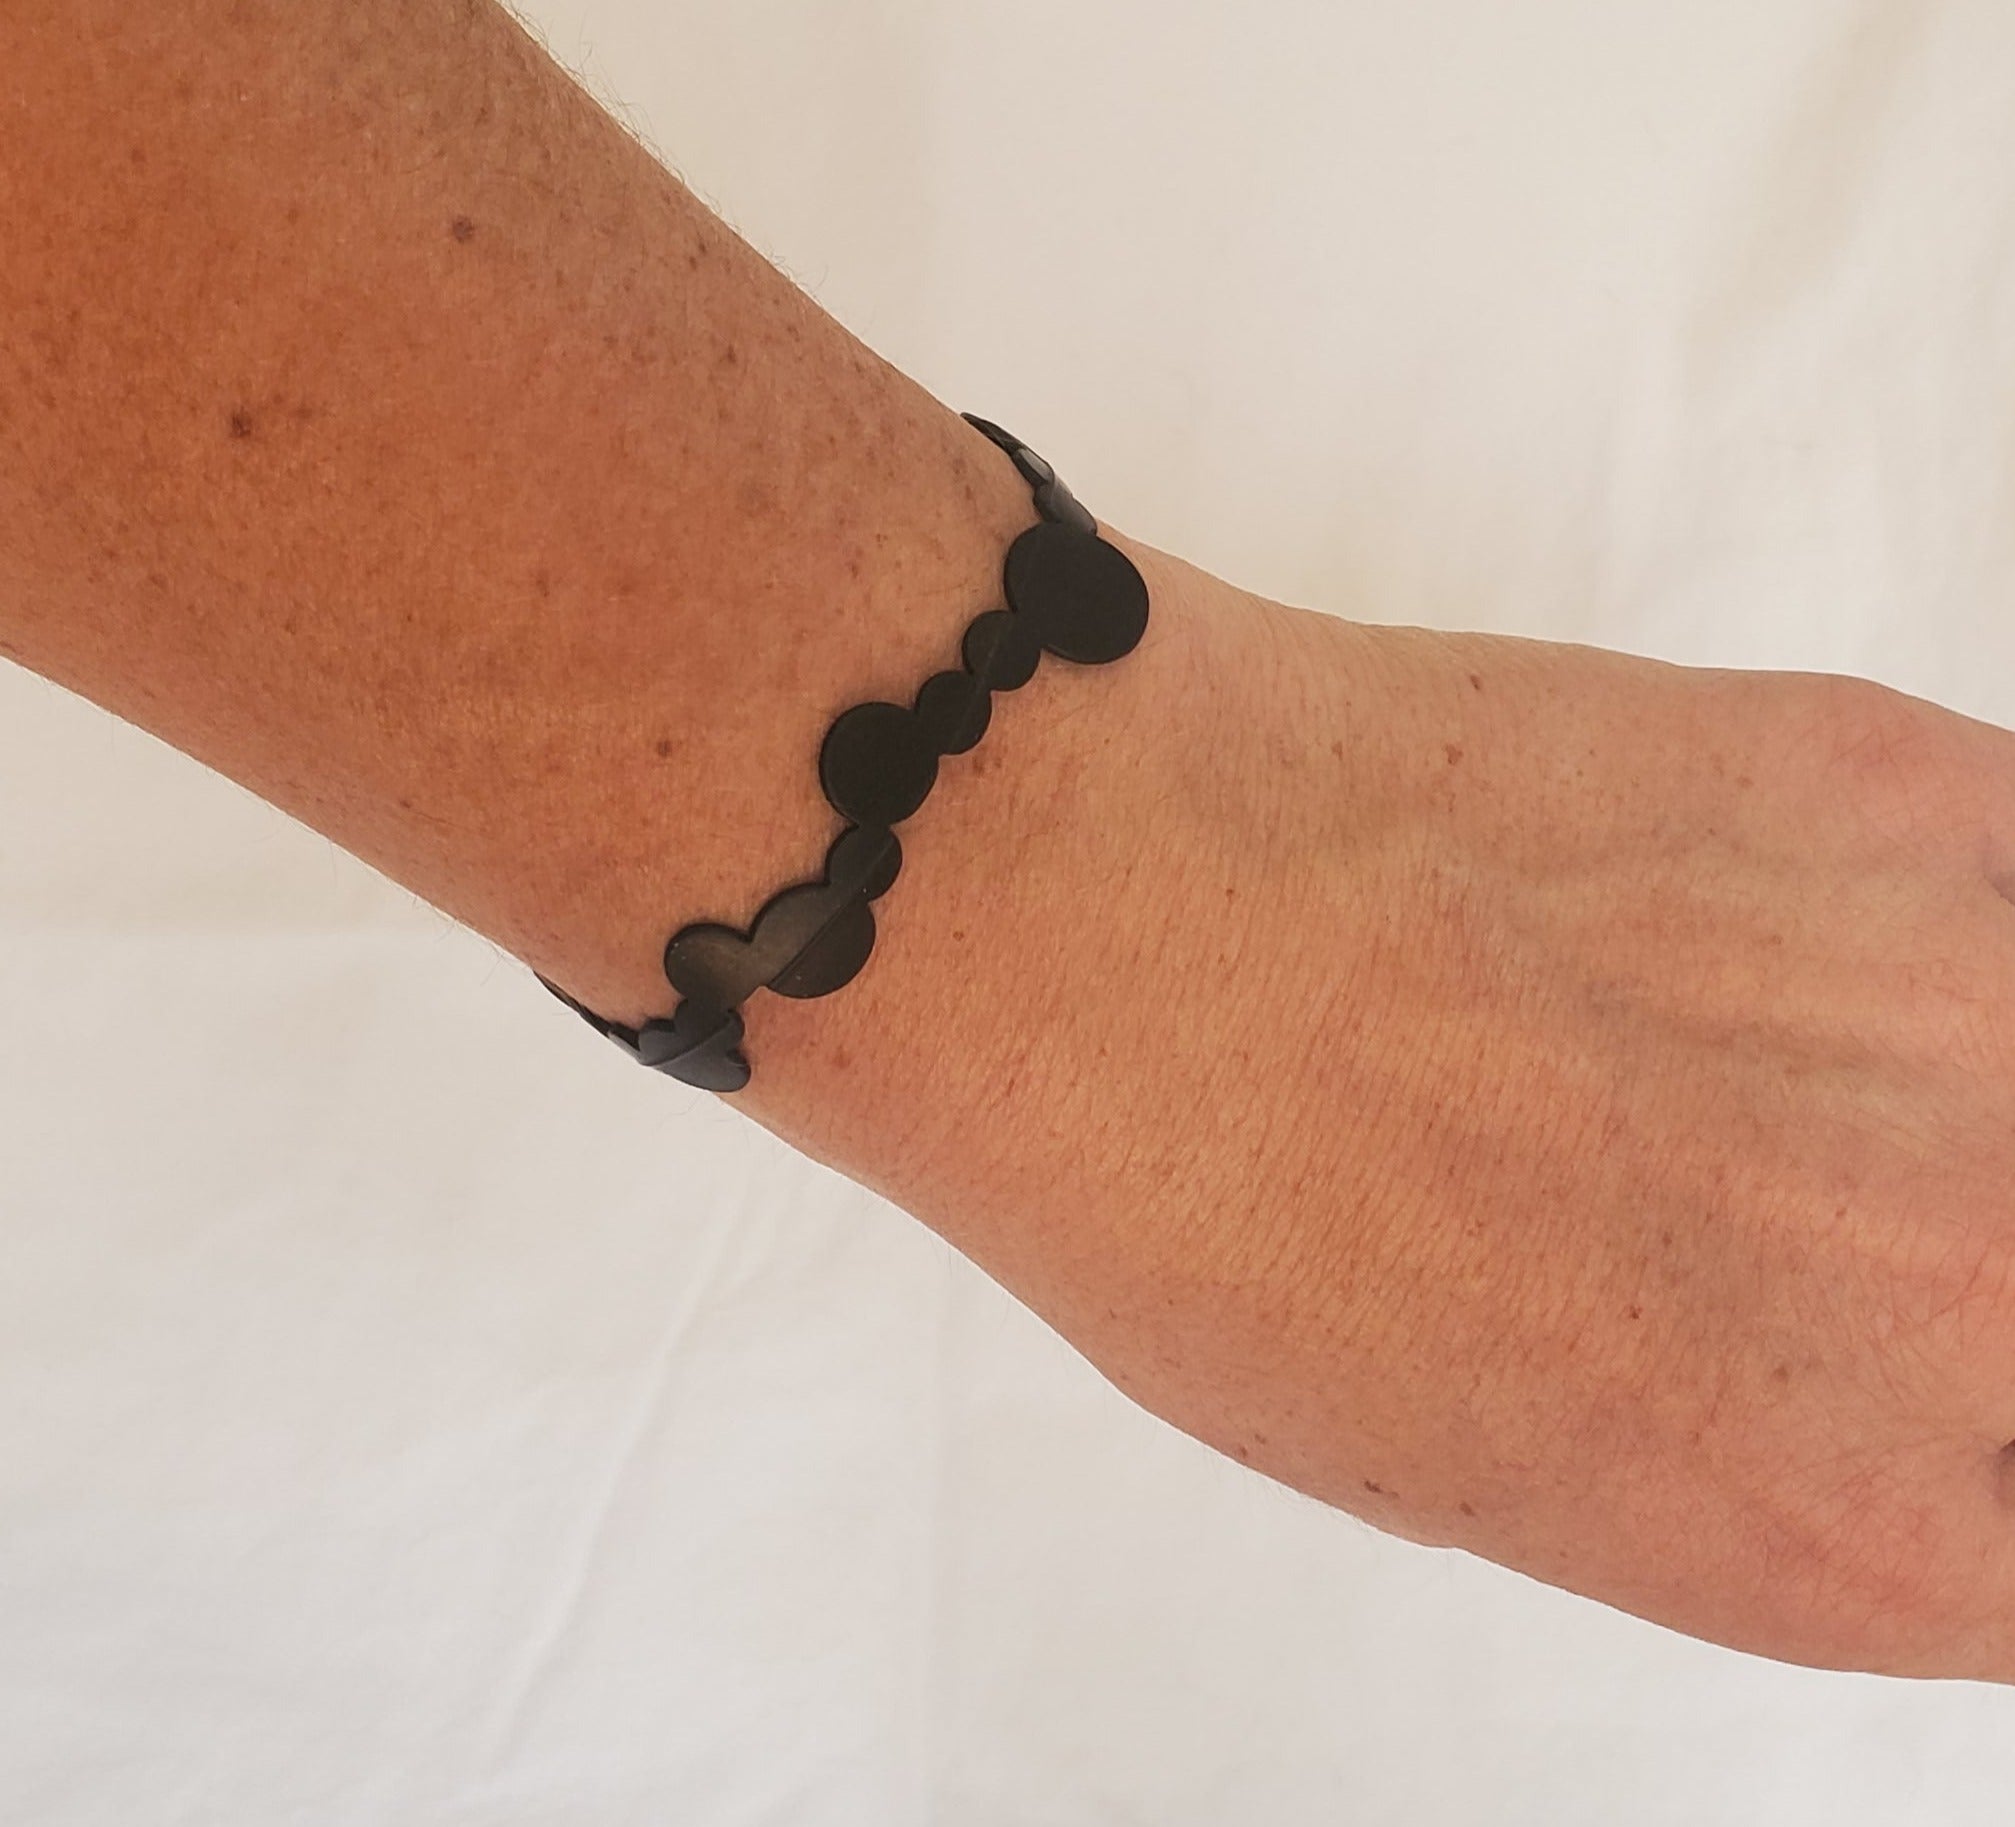 River Bubbles rubber bracelet is inspired by the water bubbles that lazily flow downstream. Upcycled, waterproof and lightweight rubber adventure jewelry.